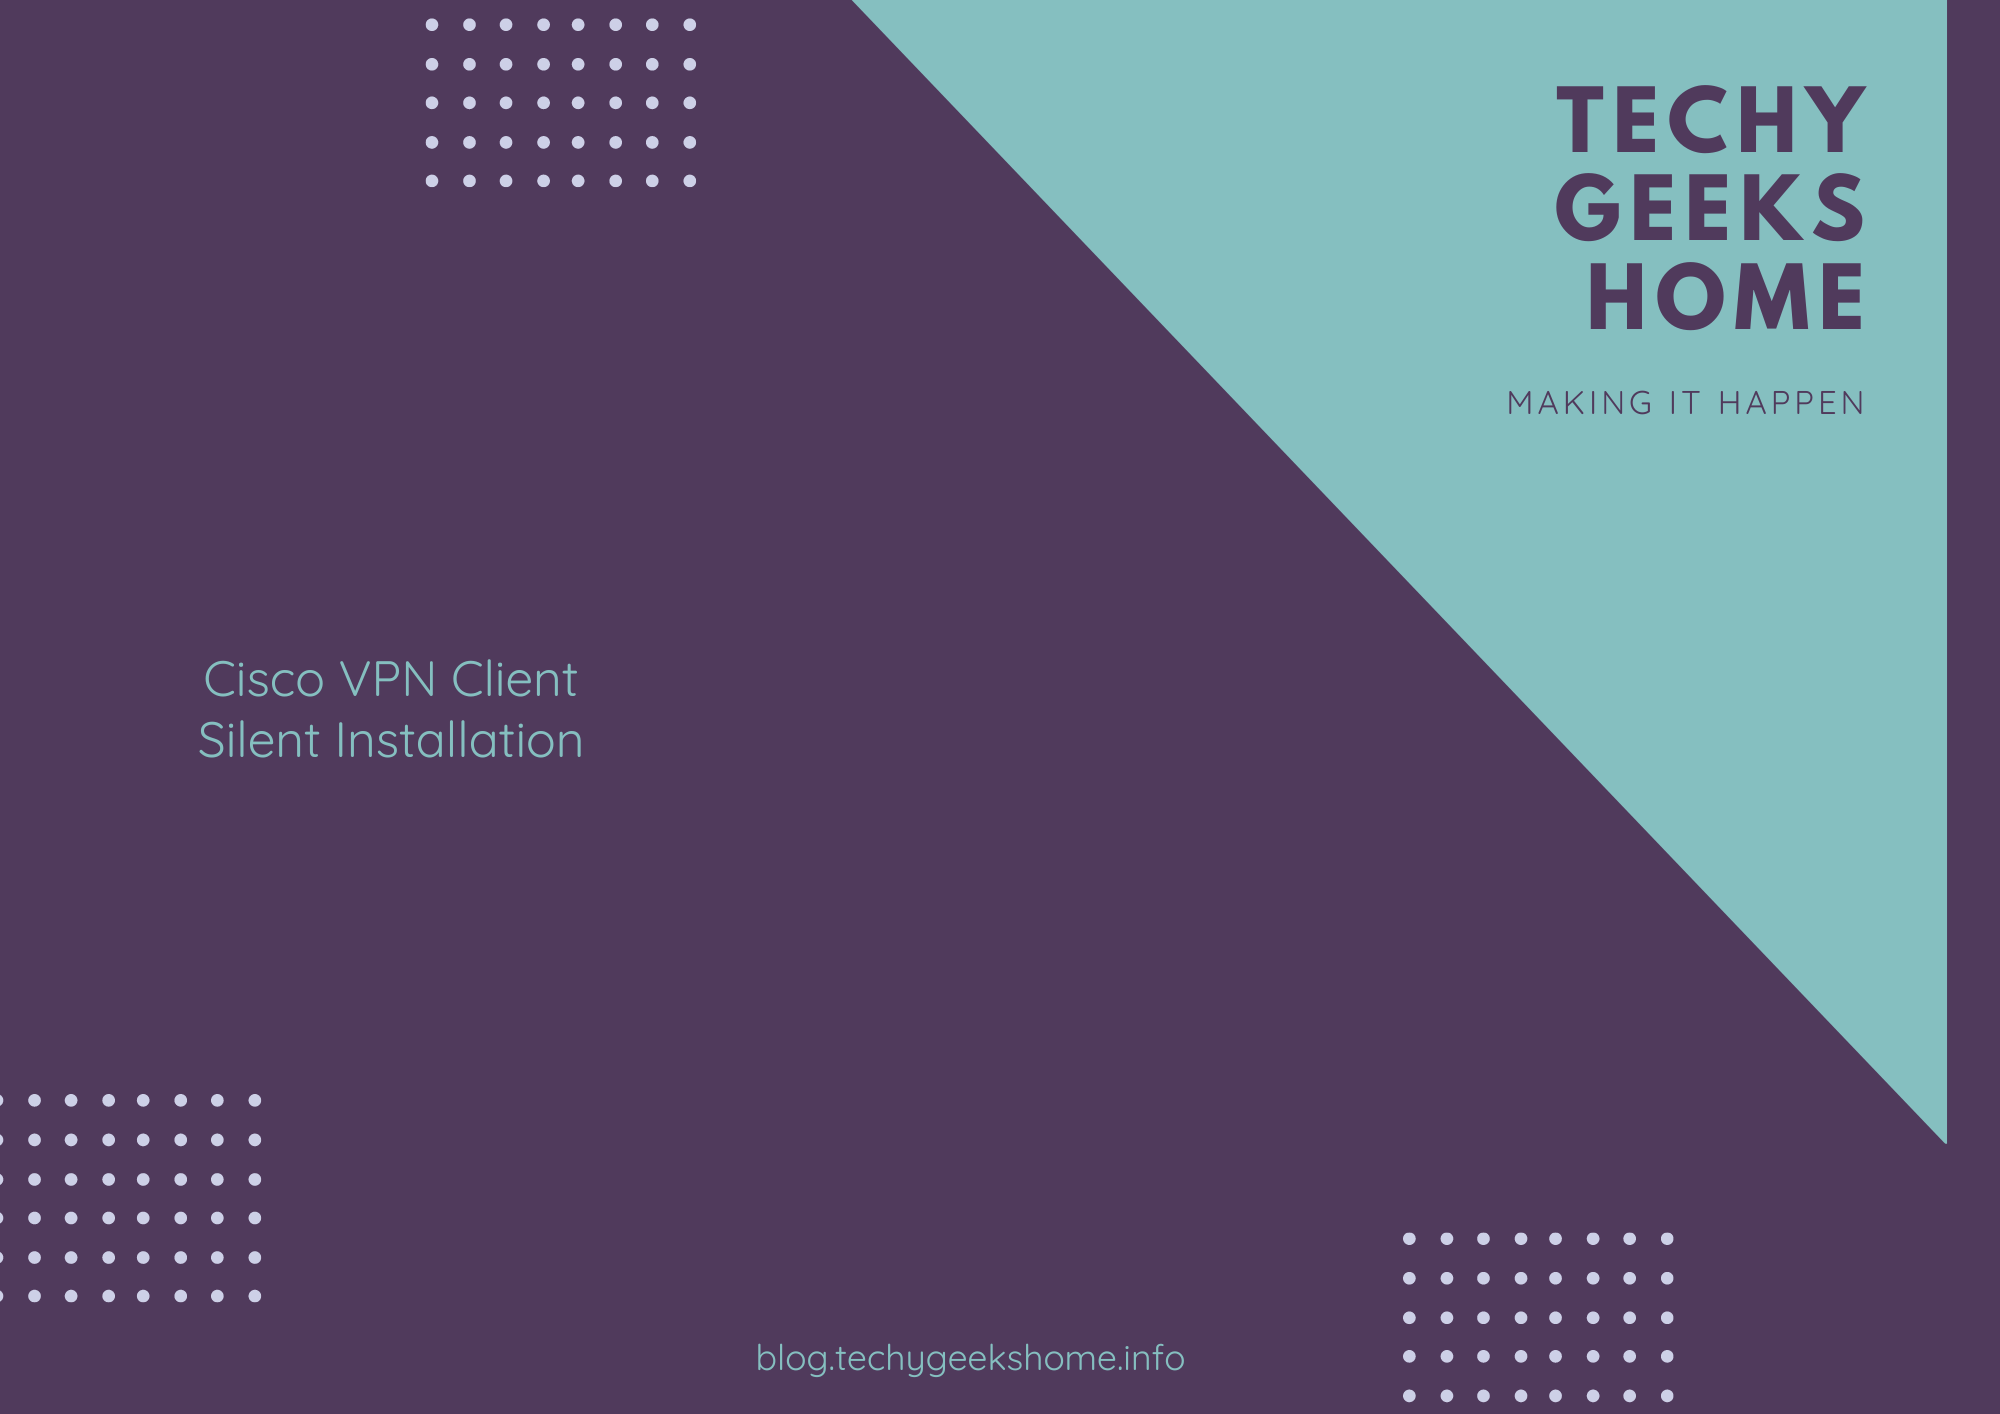 This image features a promotional graphic with a purple and teal design. It includes text that reads "Techy Geeks Home - Making it Happen" and "Deploy certificates for custom WSUS